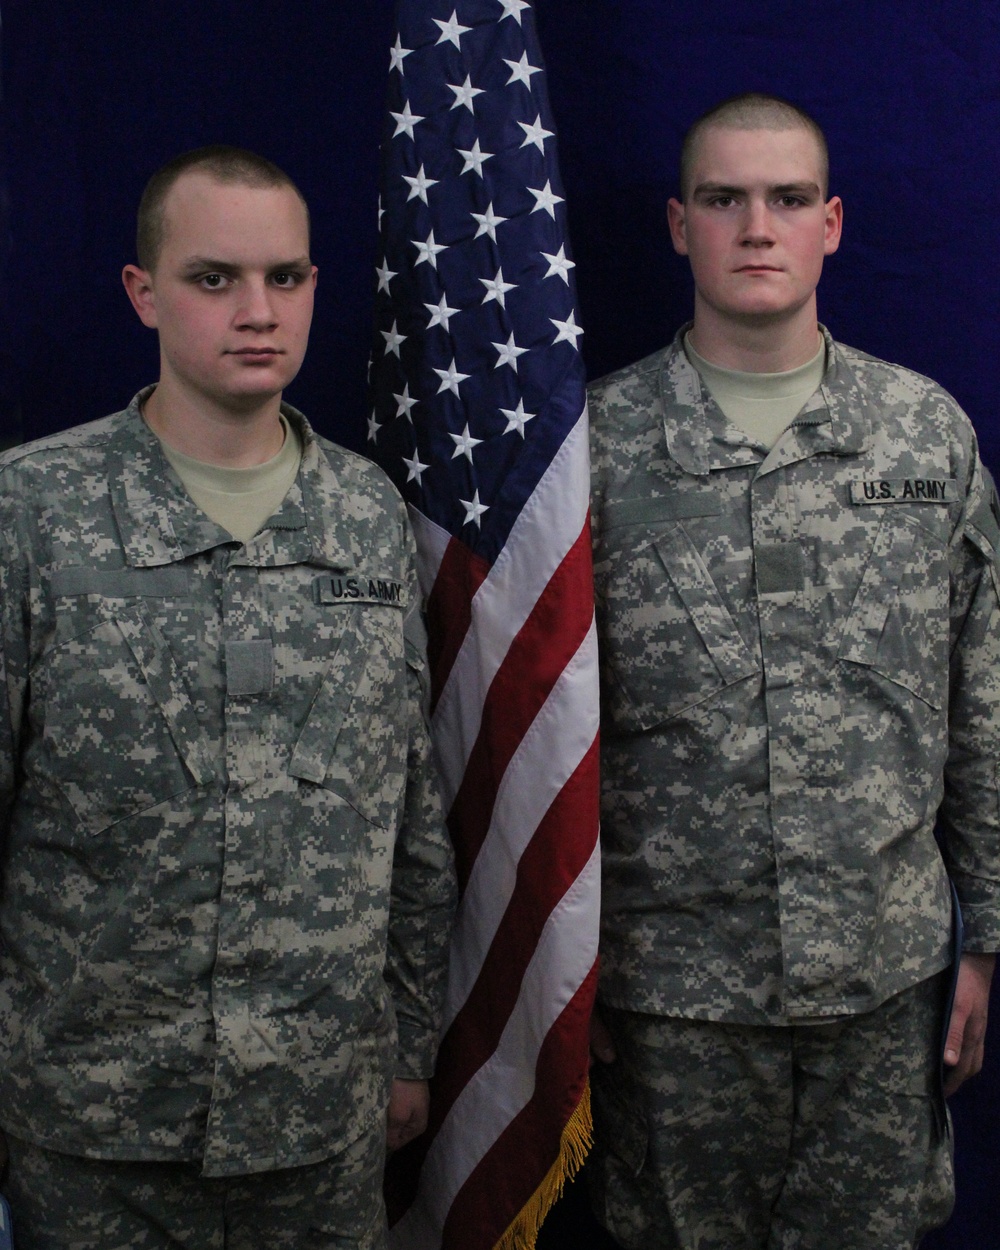 Brothers Earn GED's at ARNG GED Plus Program